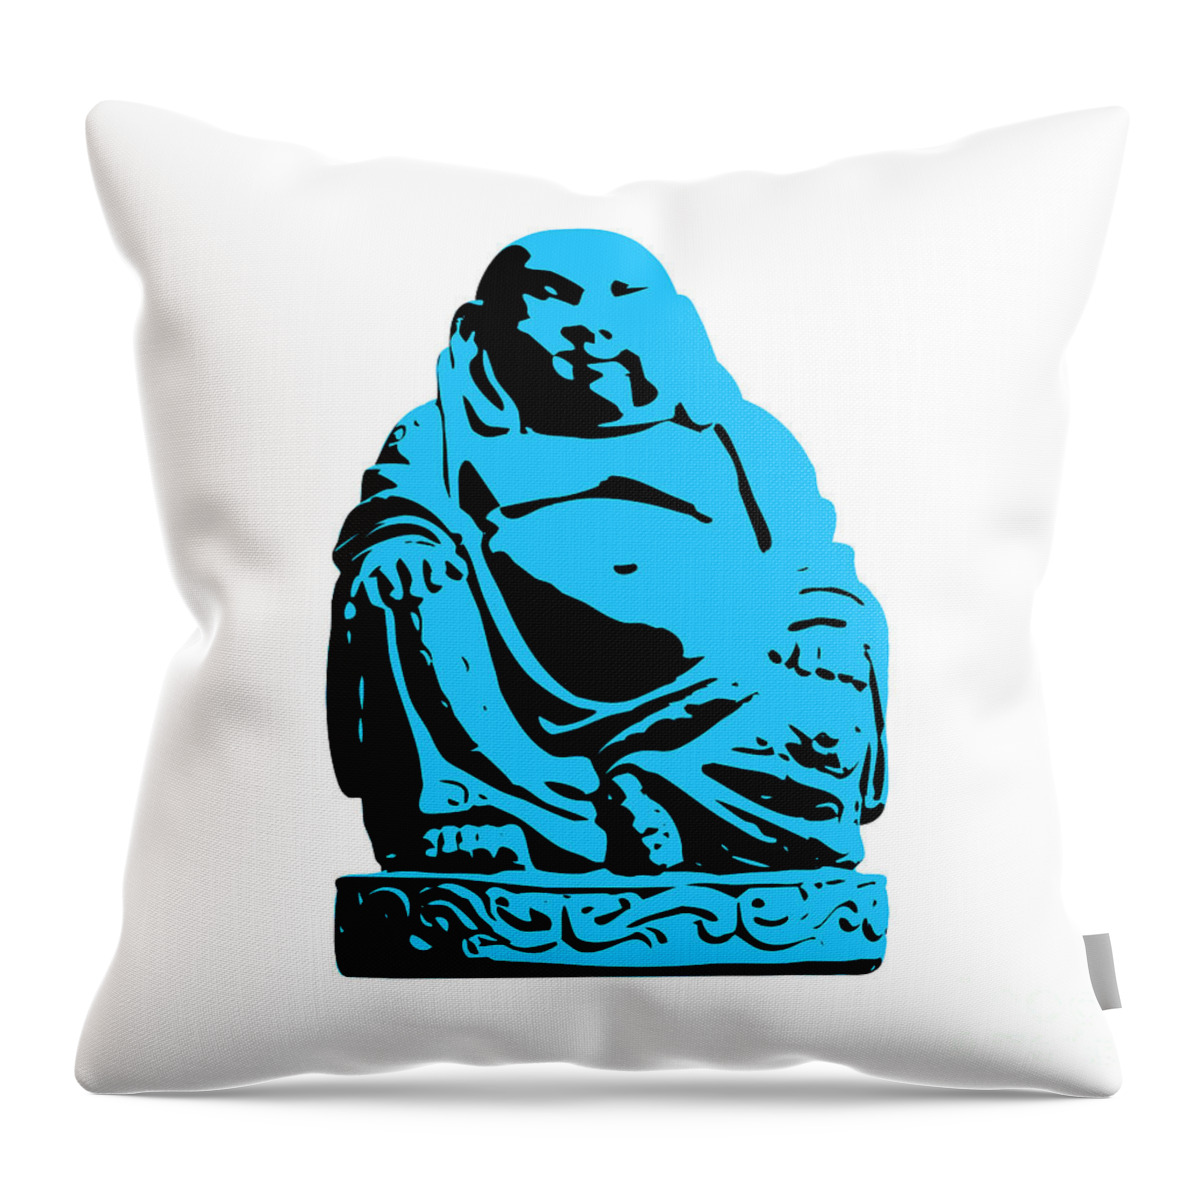 Andy Warhol Throw Pillow featuring the digital art Stencil Buddha by Pixel Chimp